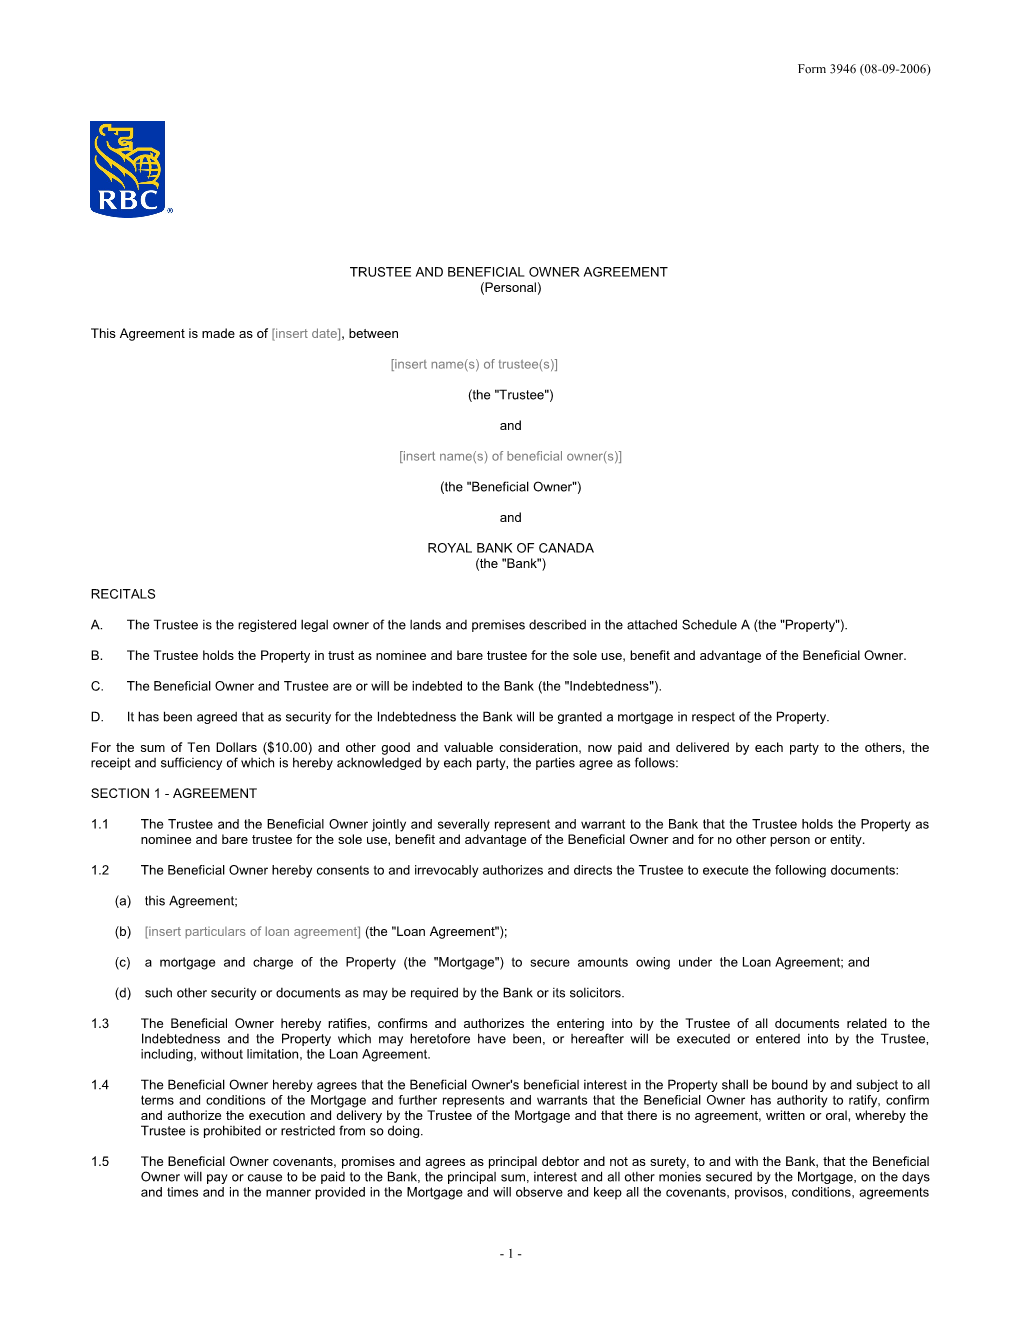 Trustee and Beneficial Owner Agreement s3